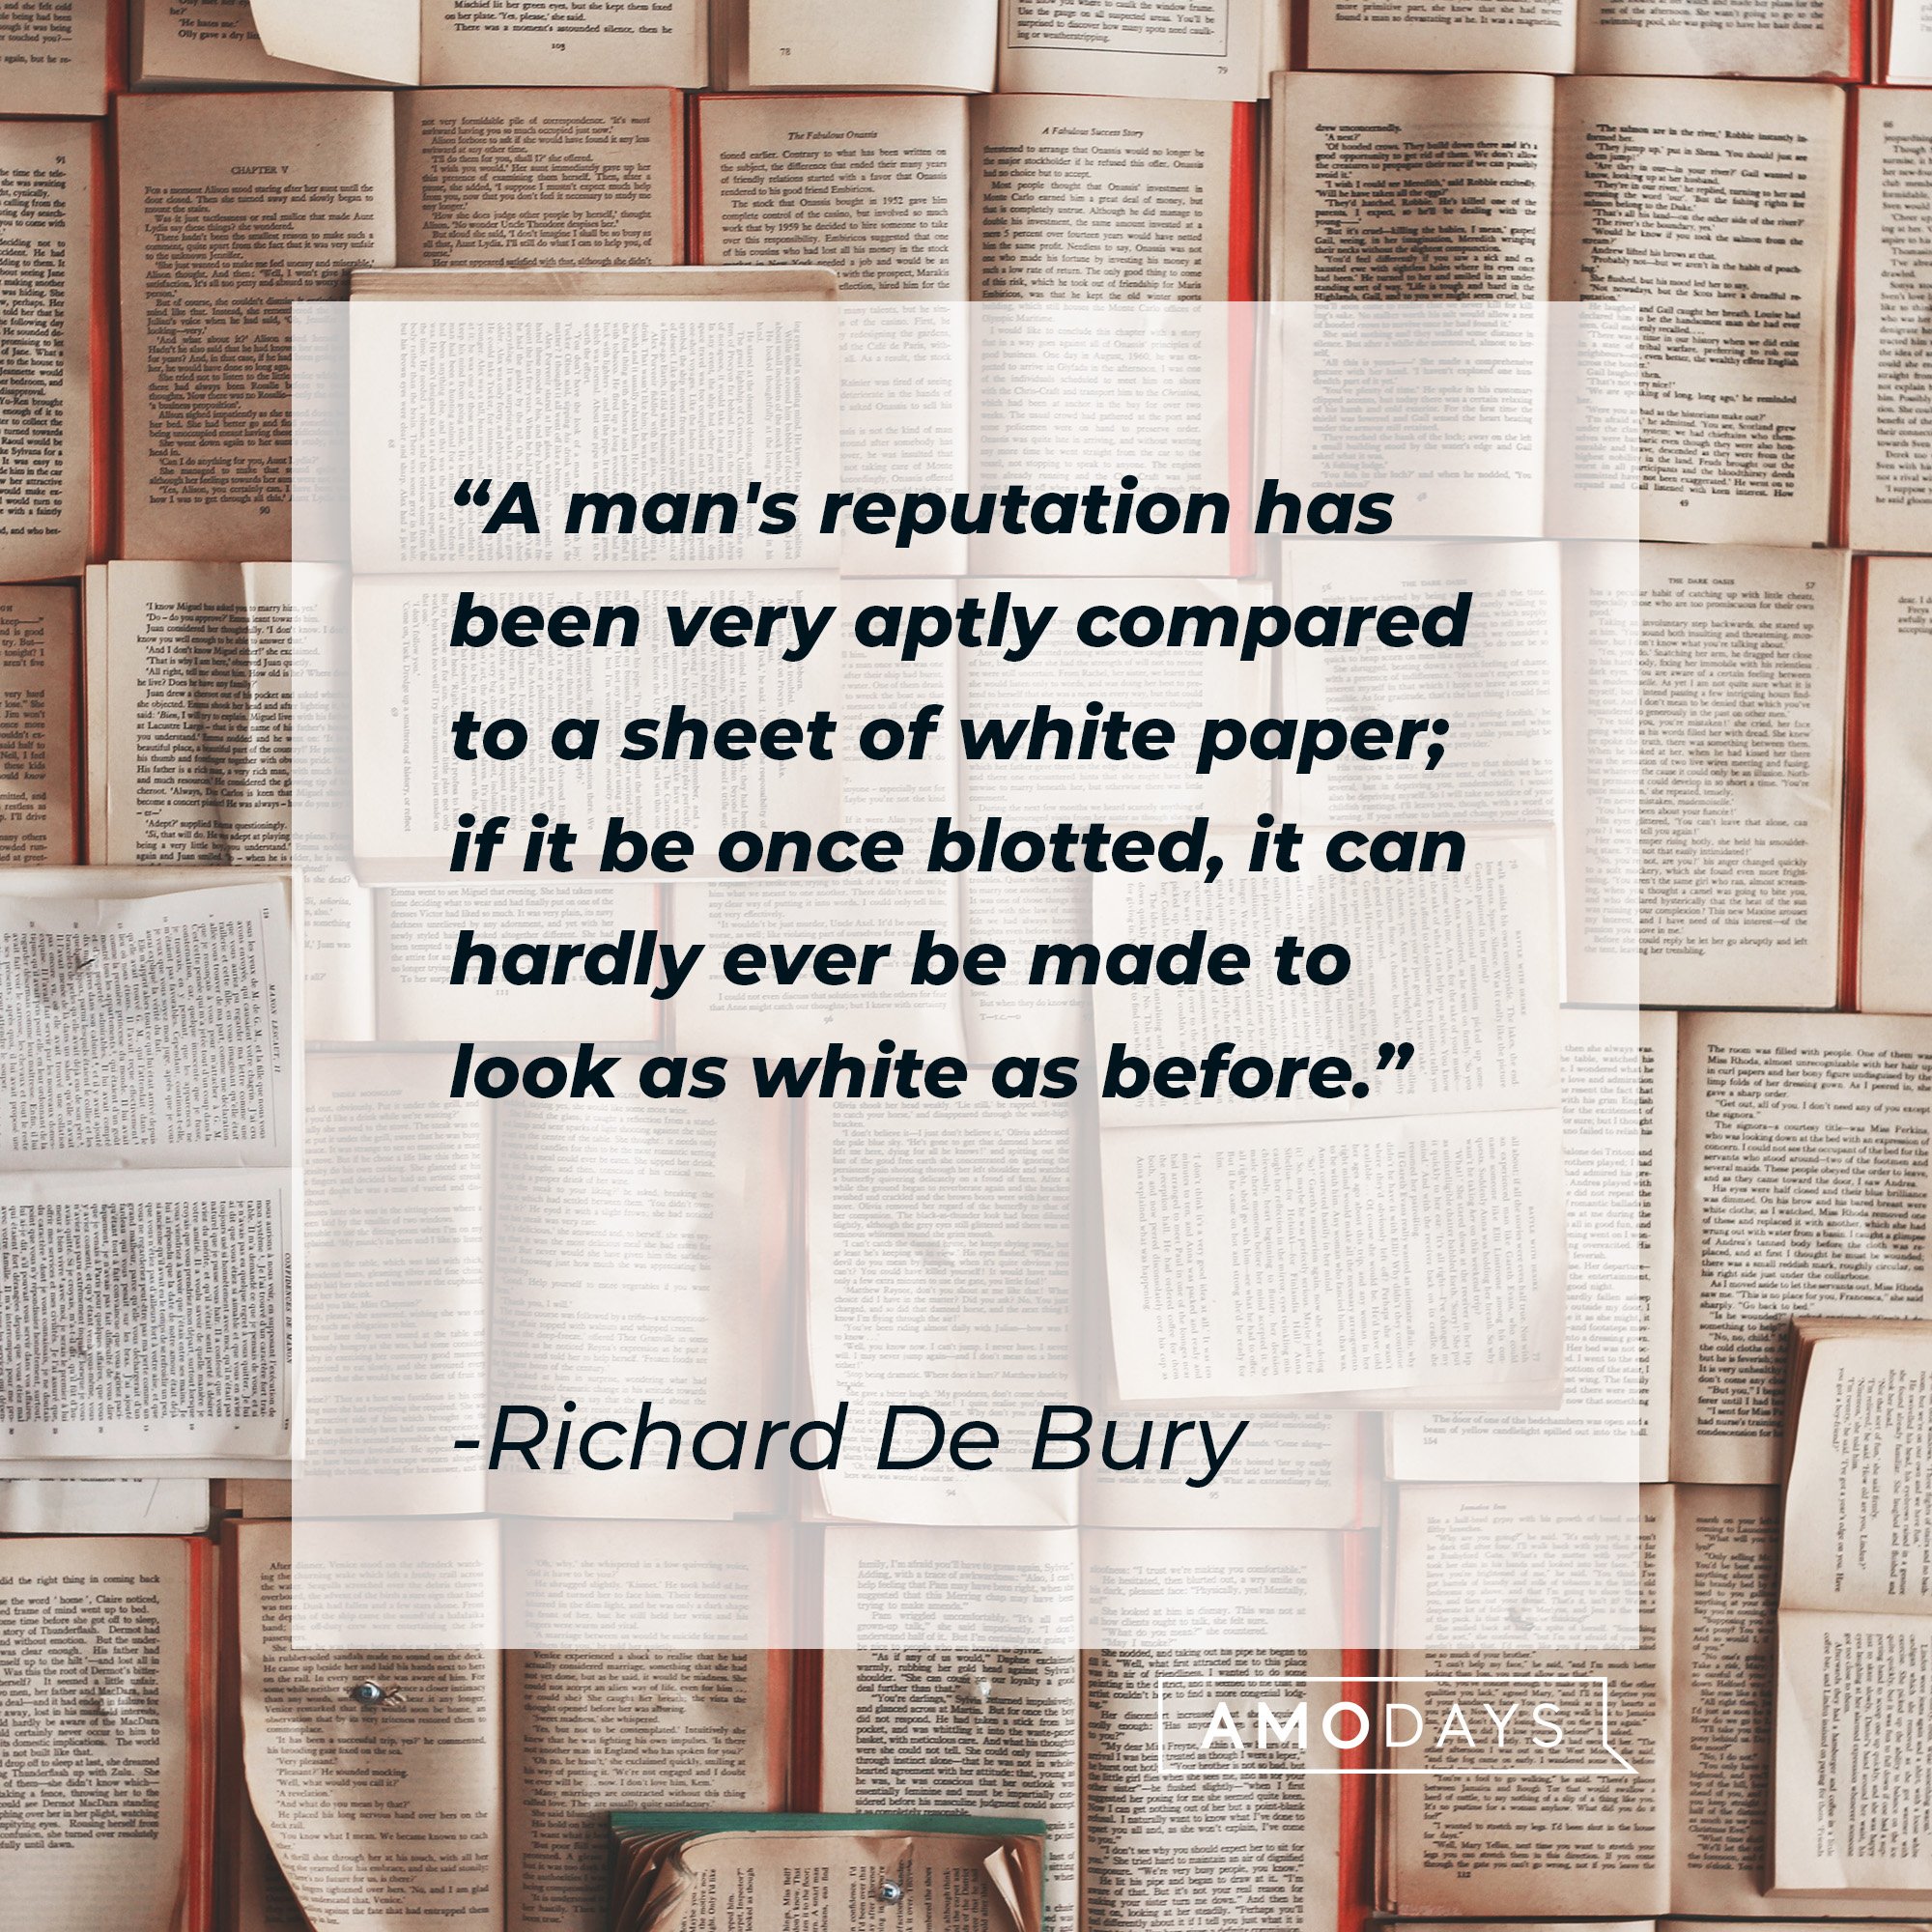 Richard De Bury’s quote: "A man's reputation has been very aptly compared to a sheet of white paper; if it be once blotted, it can hardly ever be made to look as white as before." | Image: AmoDays